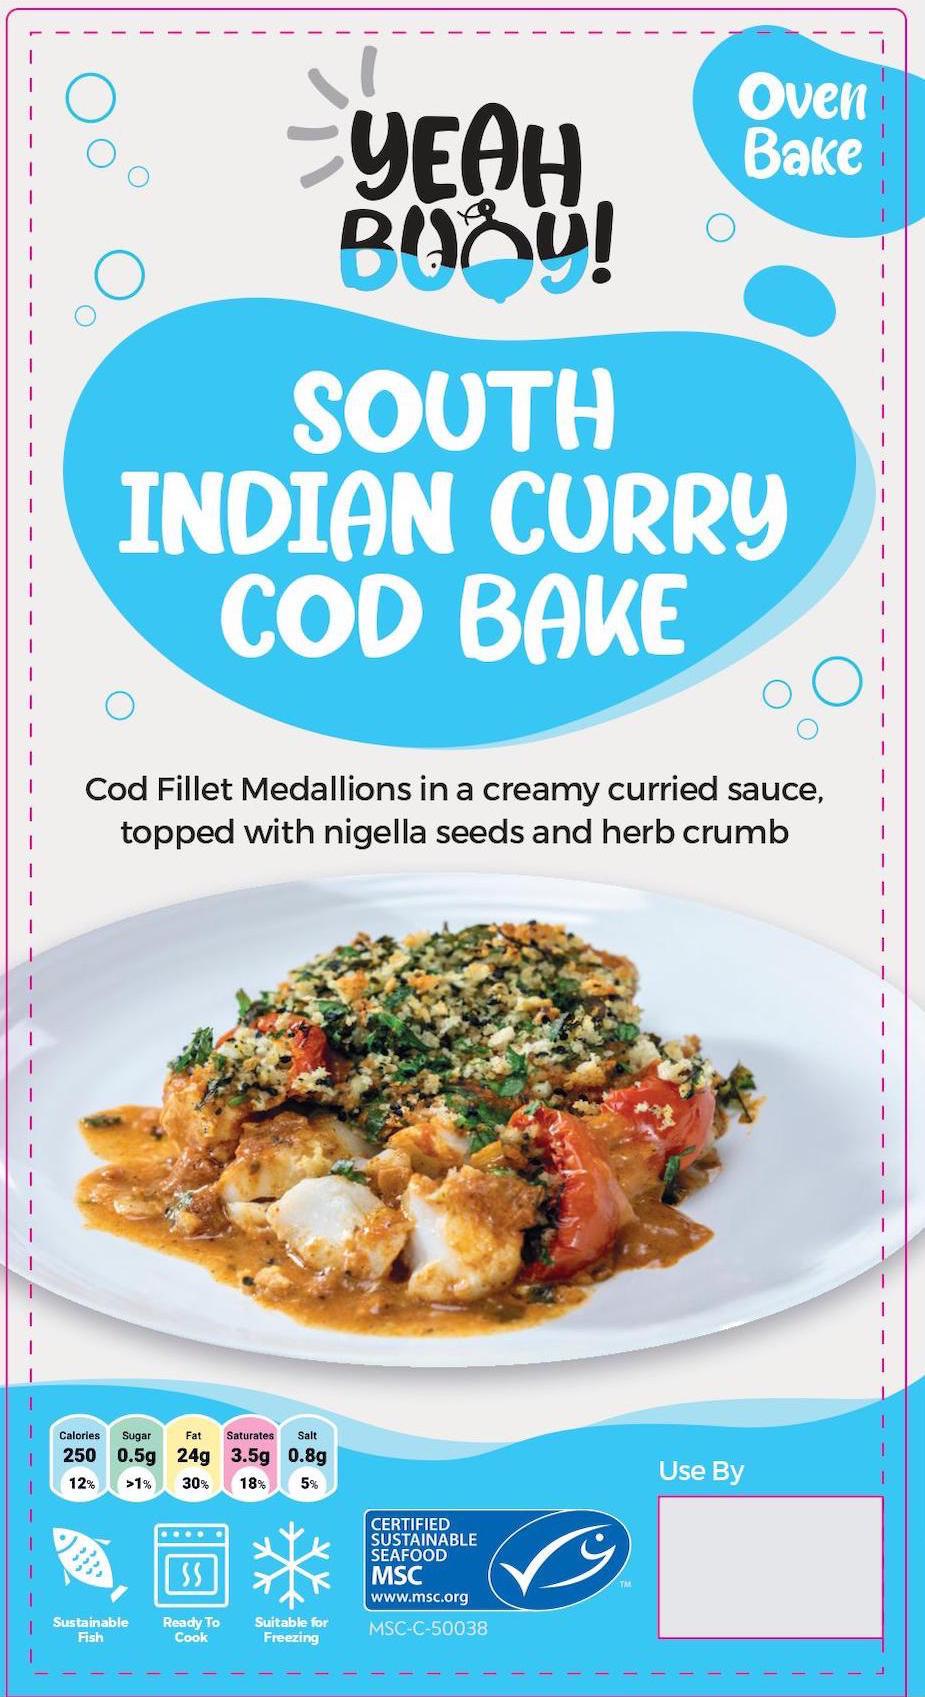 Yeah Buoy! South Indian curry cod bake package.